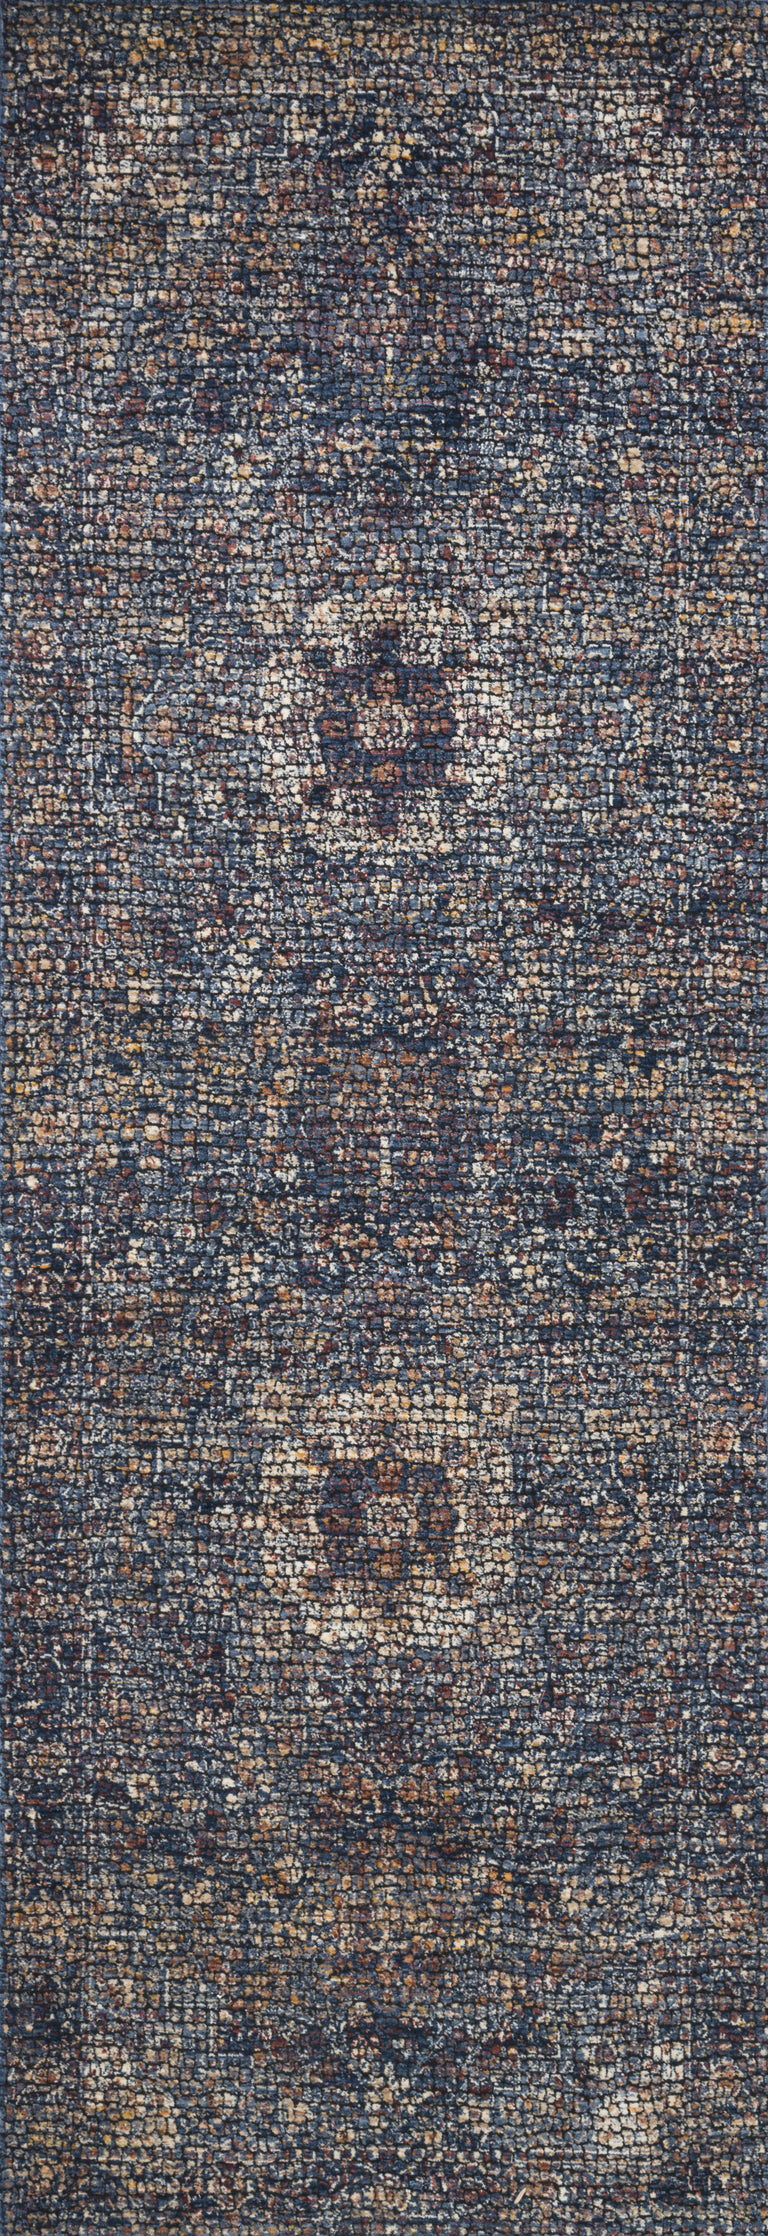 Loloi Rugs Porcia Collection Rug in Blue, Blue - 9'6" x 12'6", PORCPB-01BBBB96C6